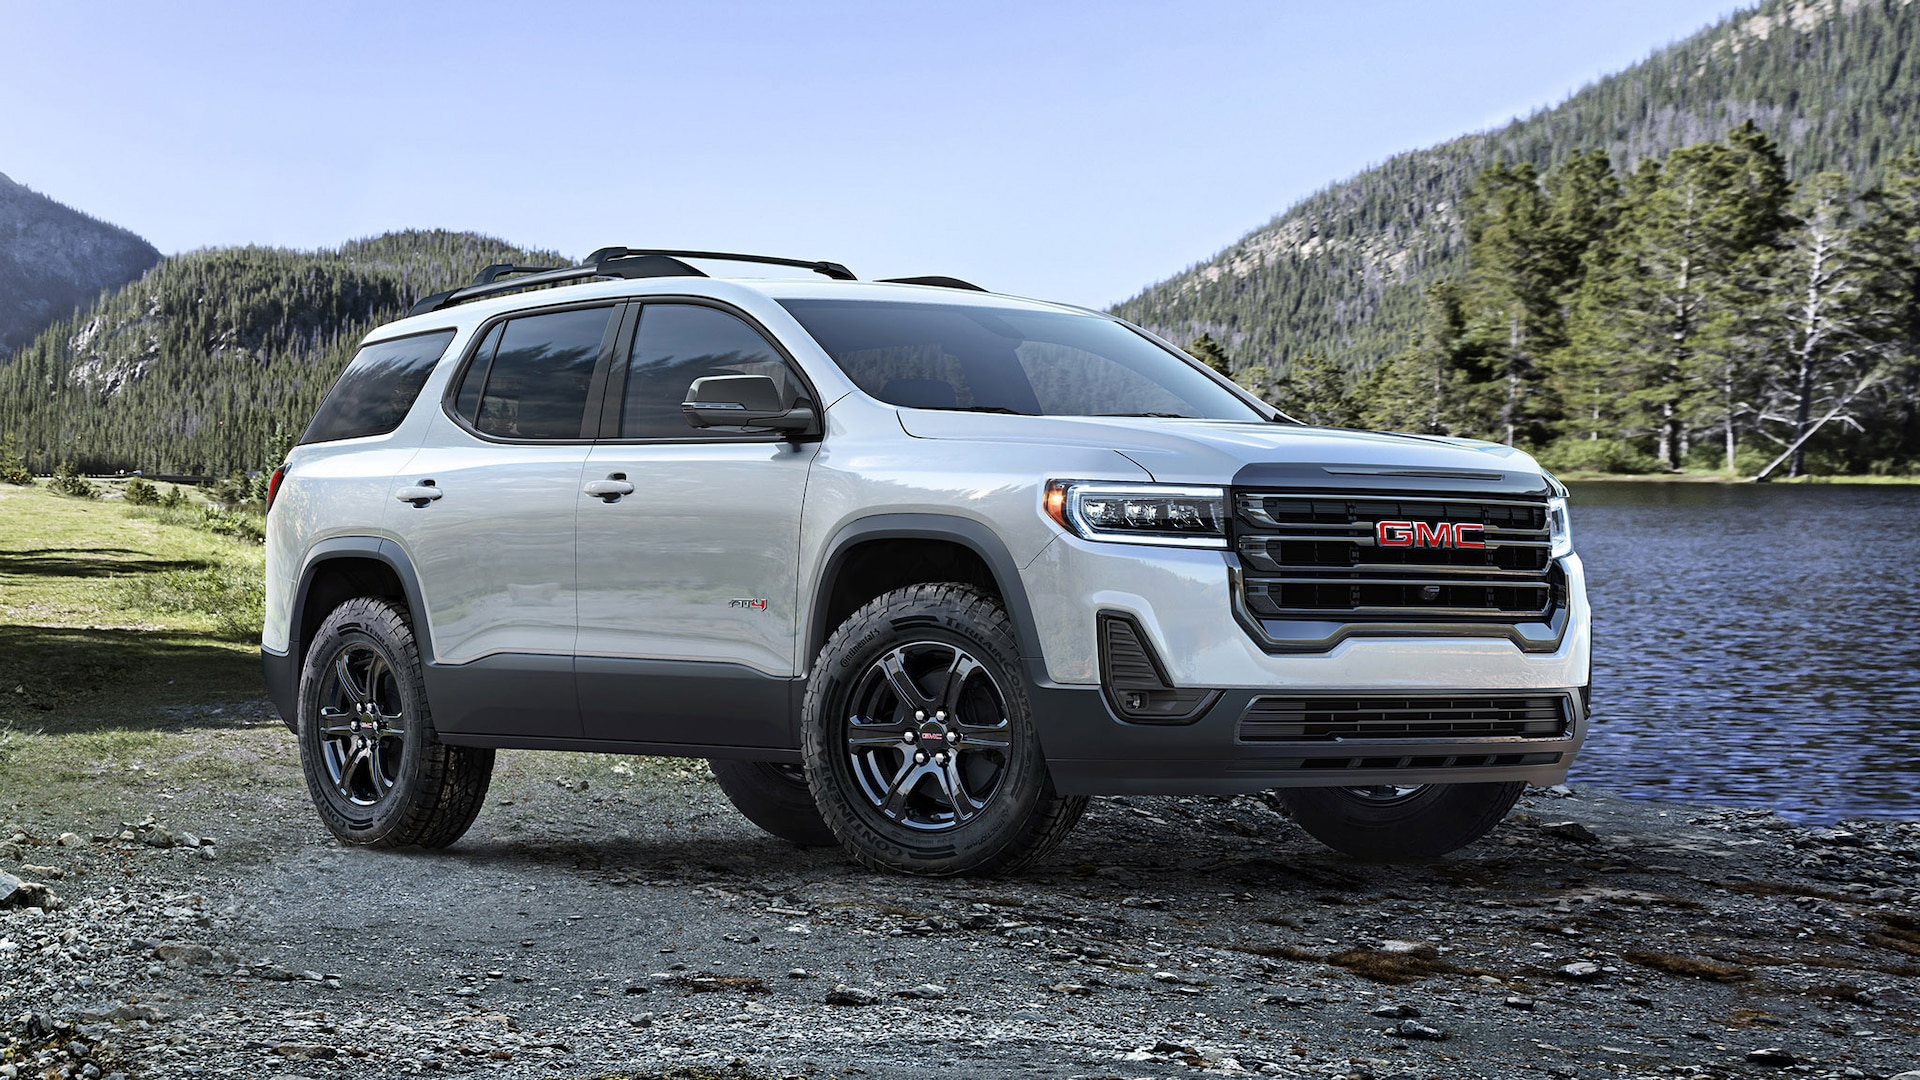 2022 GMC Acadia Prices, Reviews, and Photos - MotorTrend